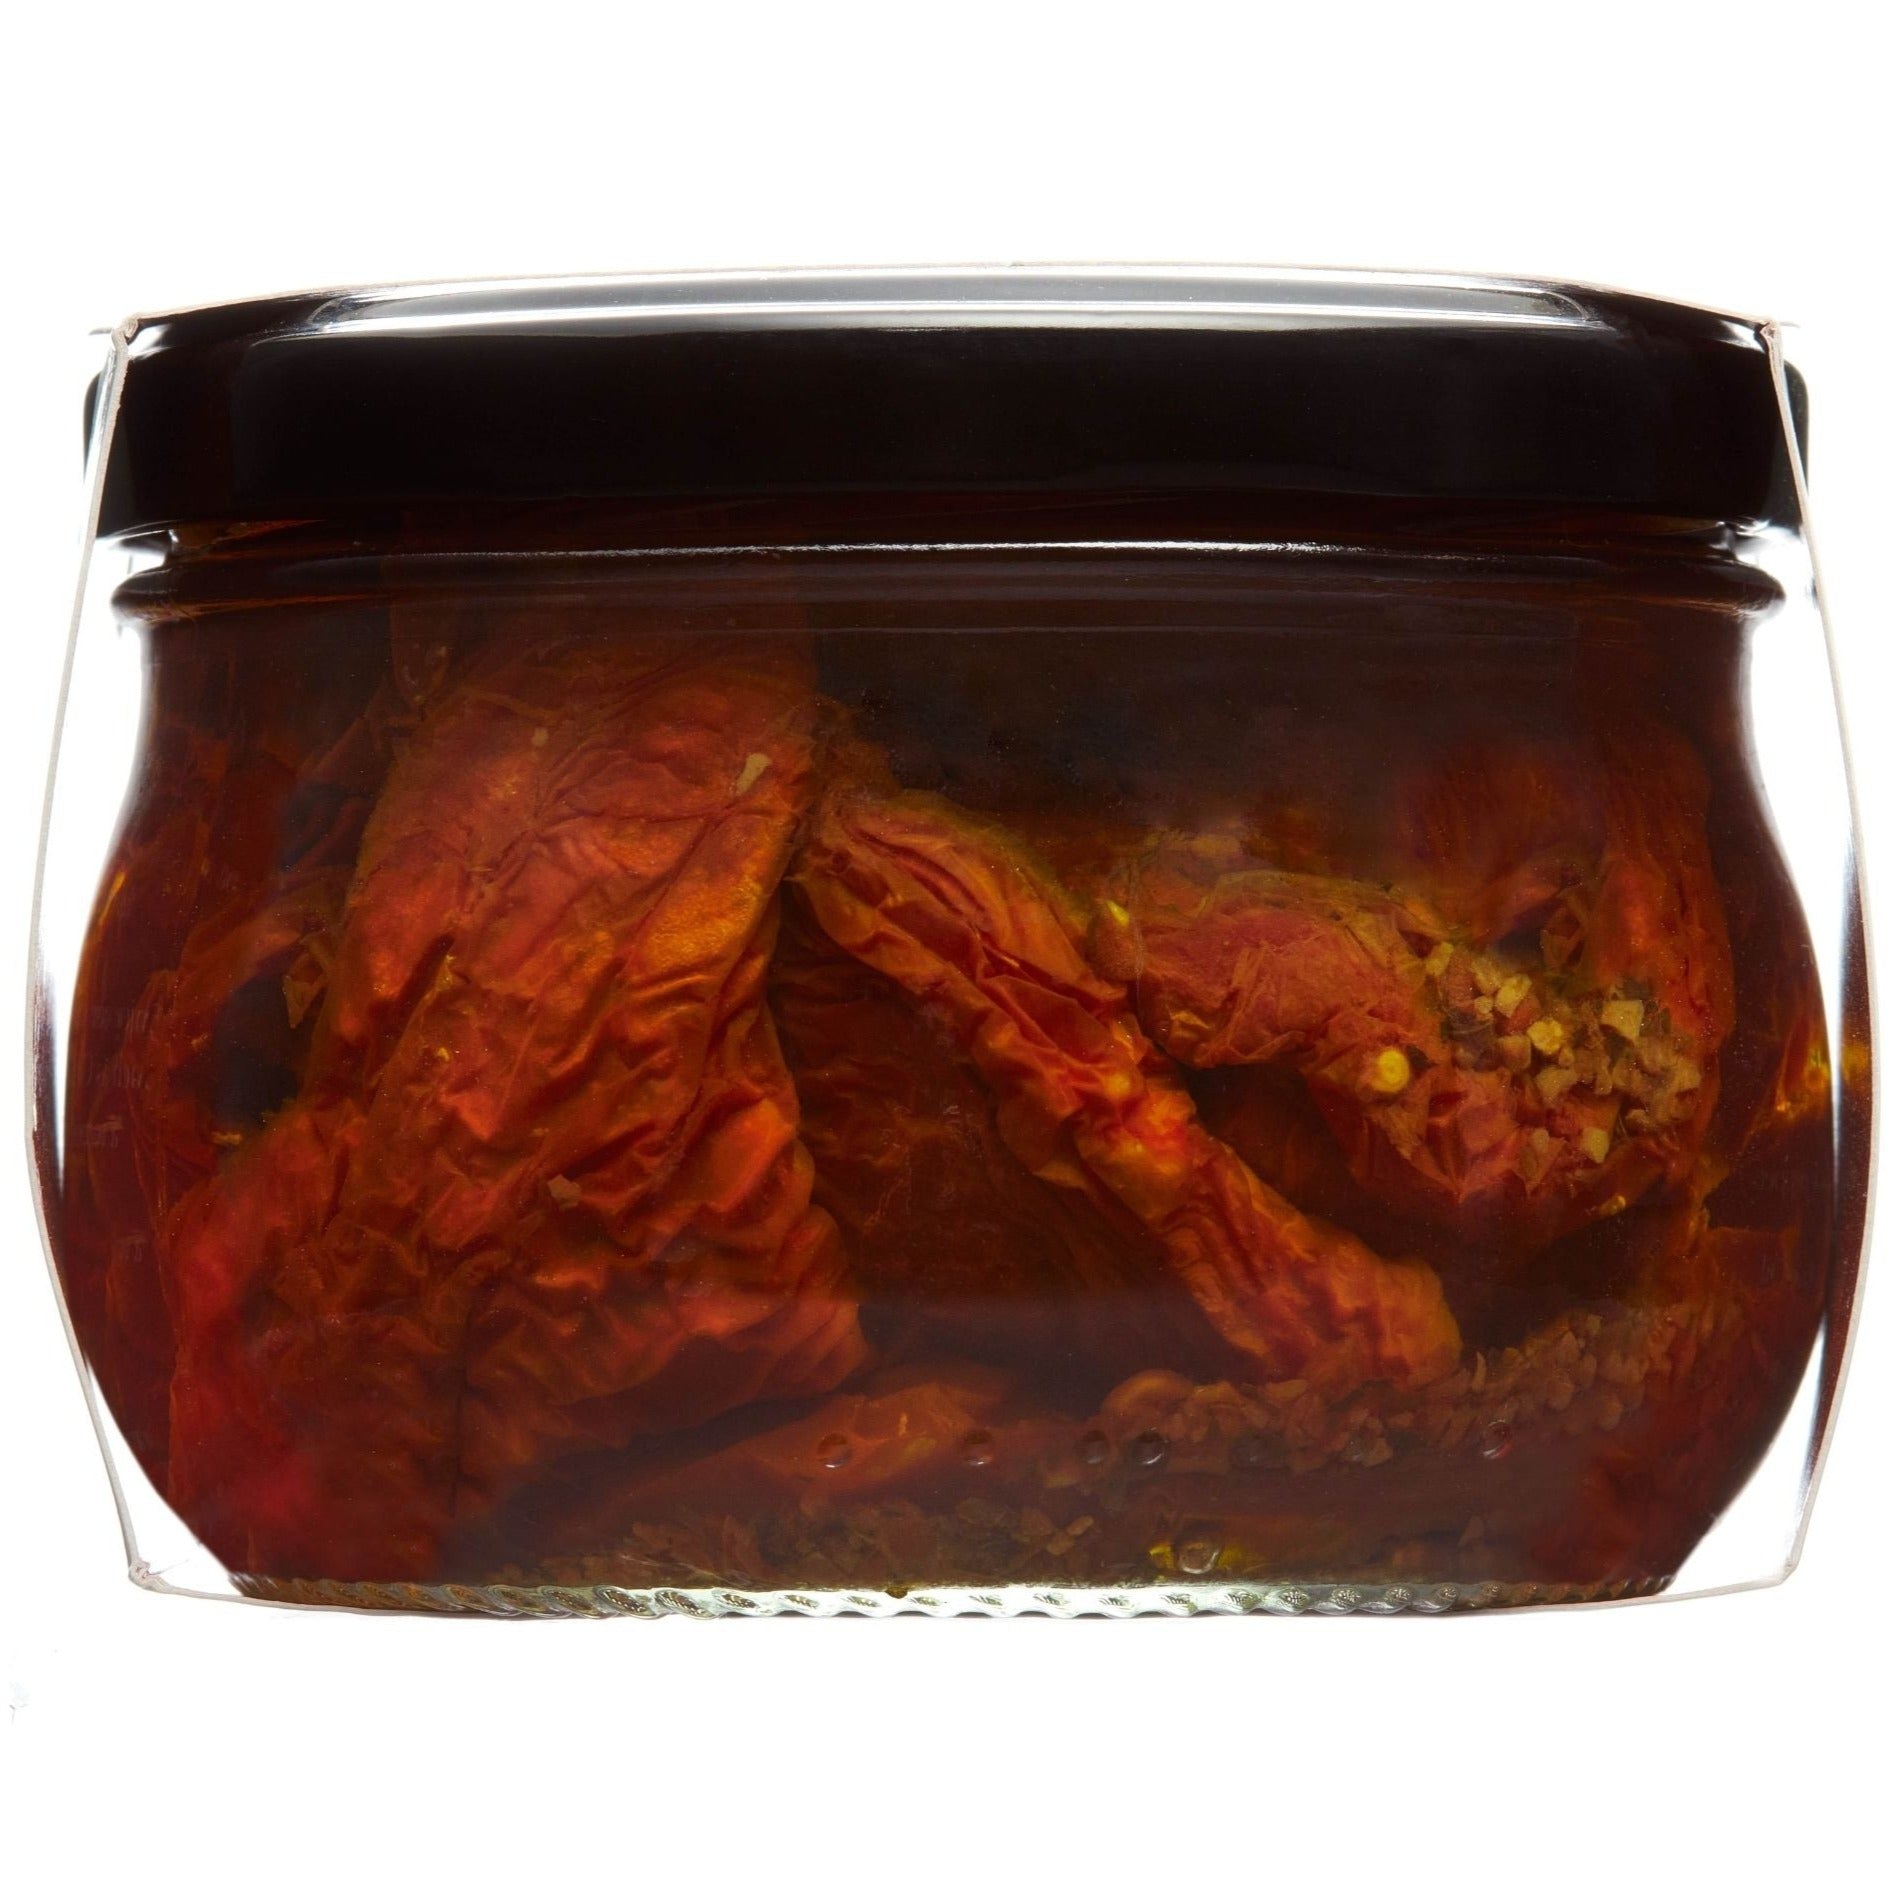 Sun-Dried Tomatoes – Amore